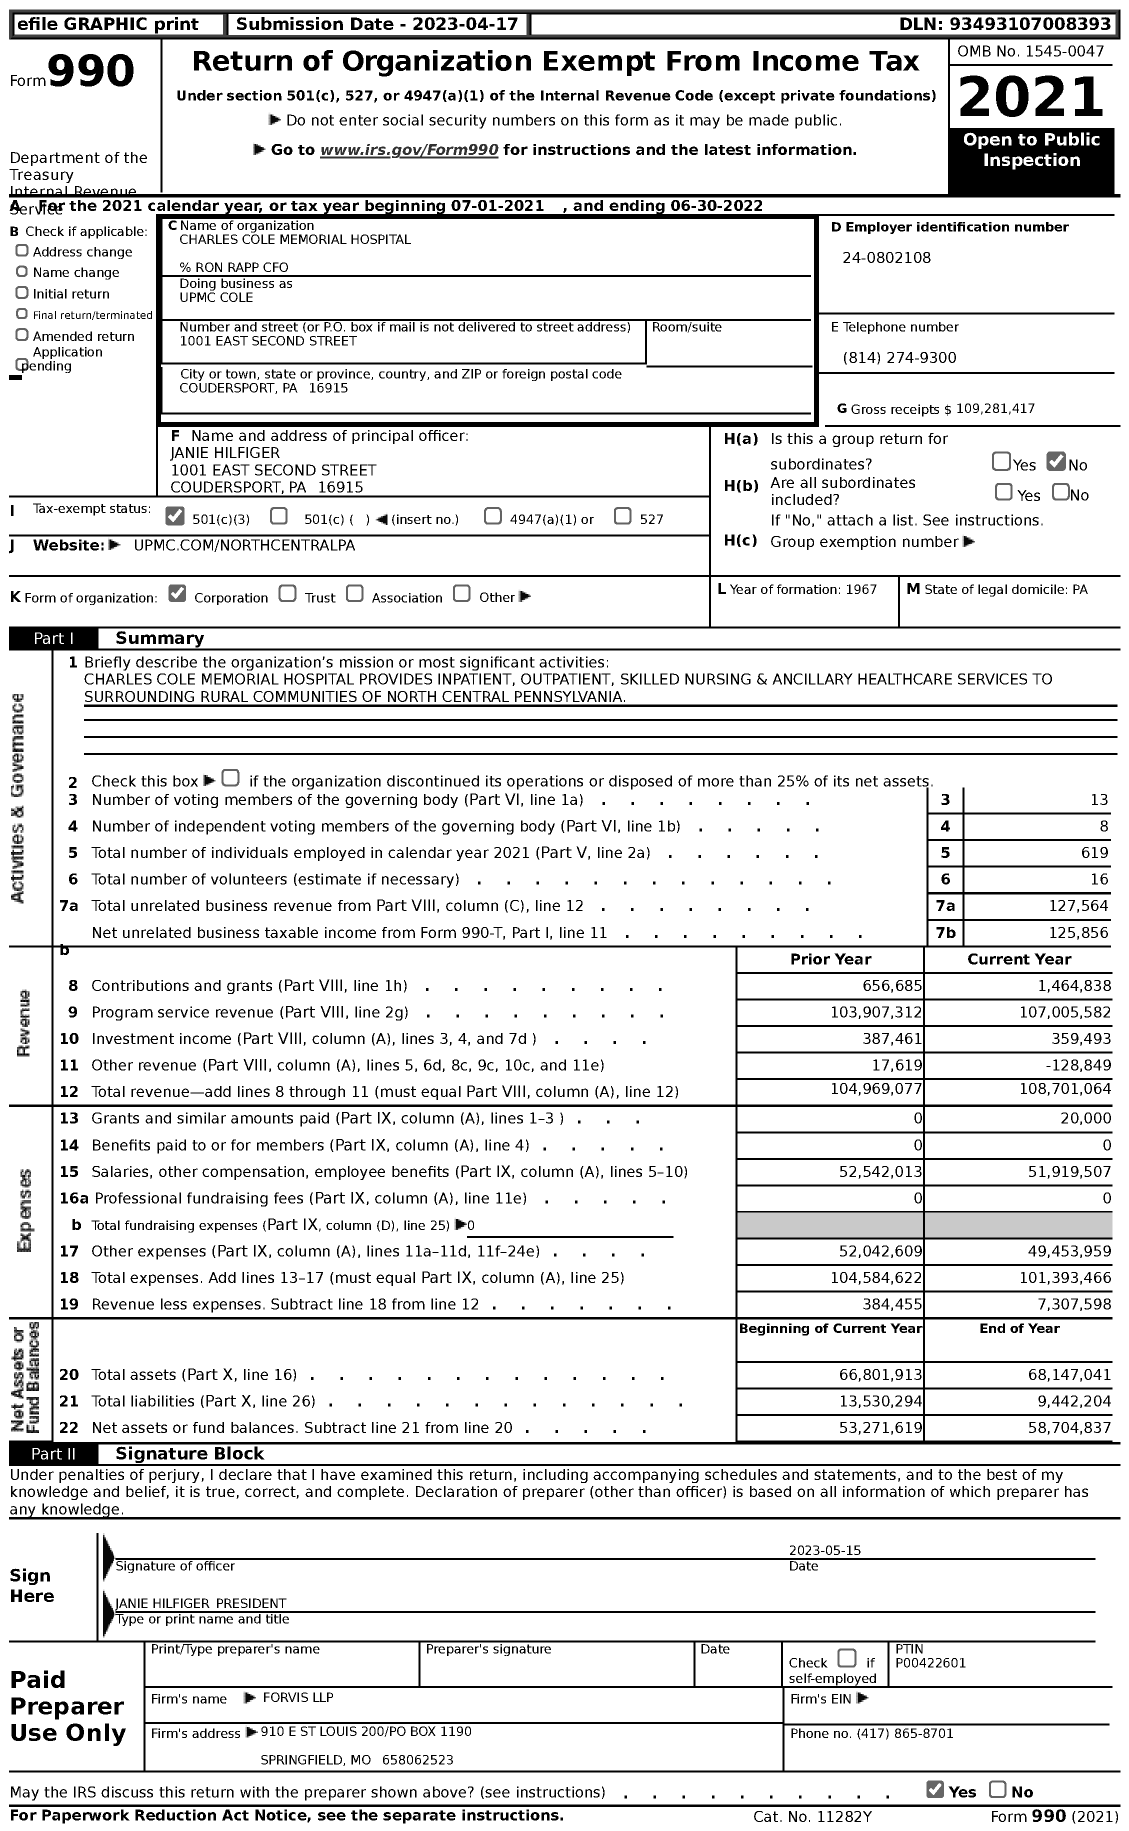 Image of first page of 2021 Form 990 for Upmc Cole